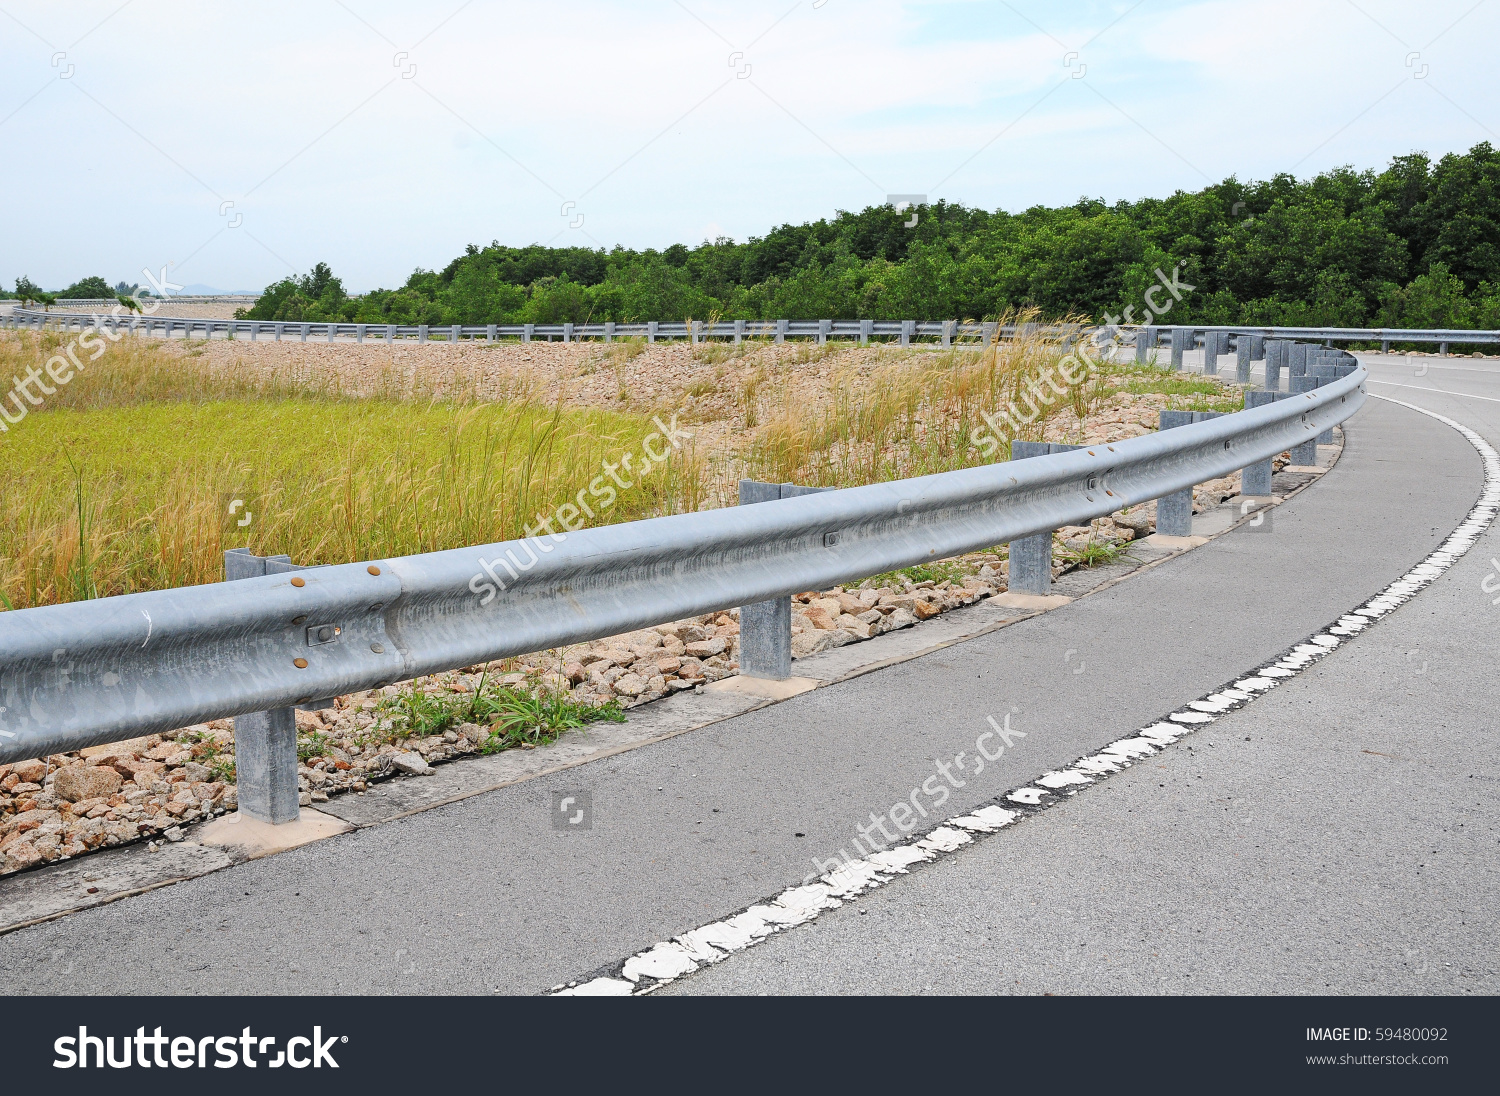 Highway Passing Through Countryside Crash Barrier Stock Photo.